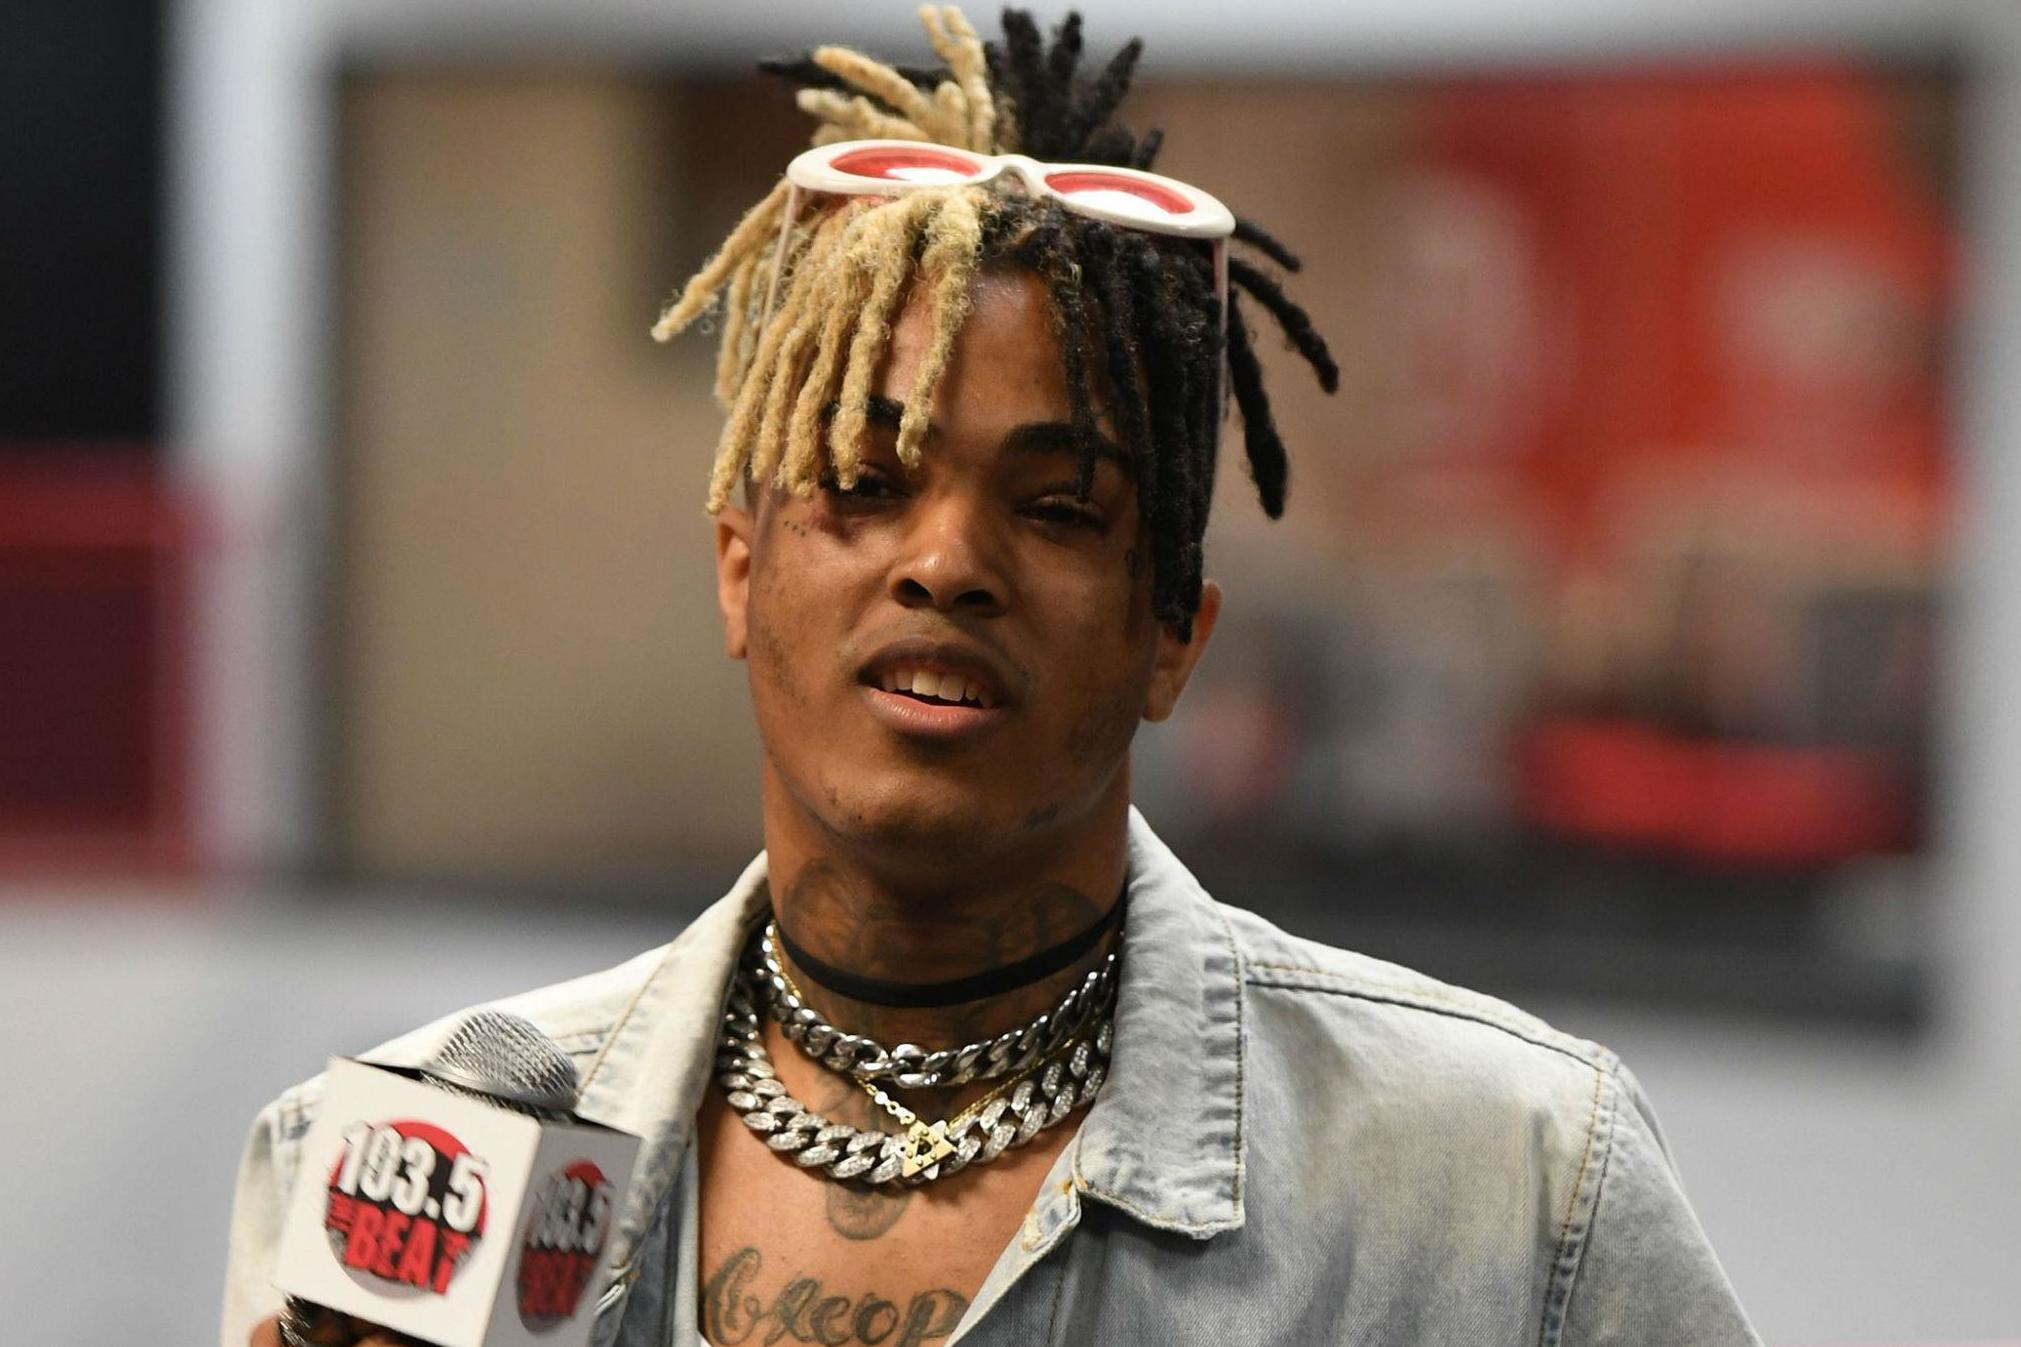 XXXTentacion and Lil Peep collaboration track 'Falling Down